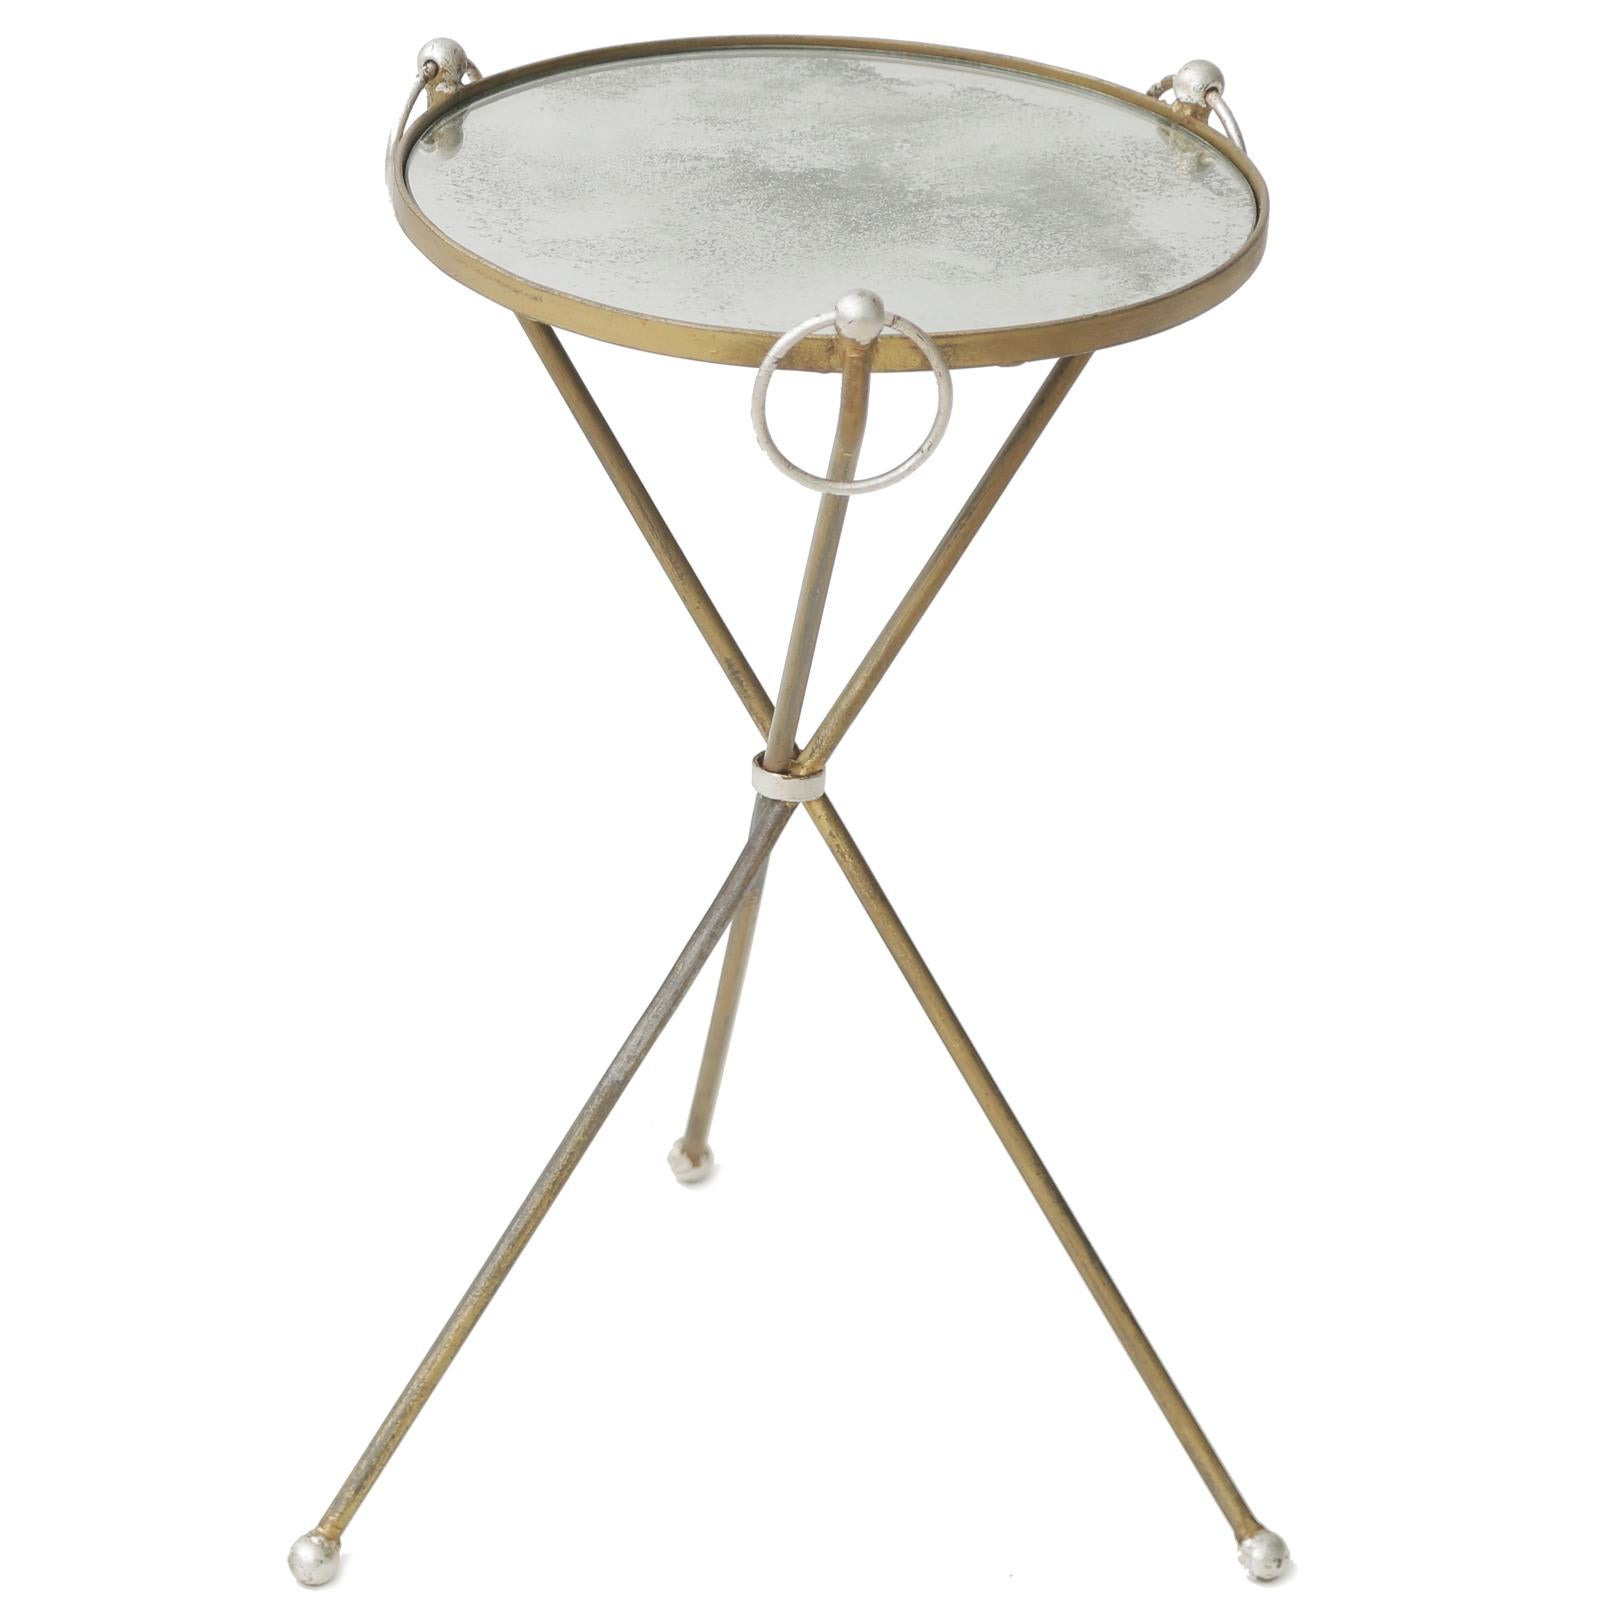 Accent table in the manner of Jean Michel Frank, of silver and gold gilt metal, having a round top of aged mirrorplate, raised on a tripod of iron legs with ball feet, joined by a central loop, decorated at the top by a trio of ring ornaments.